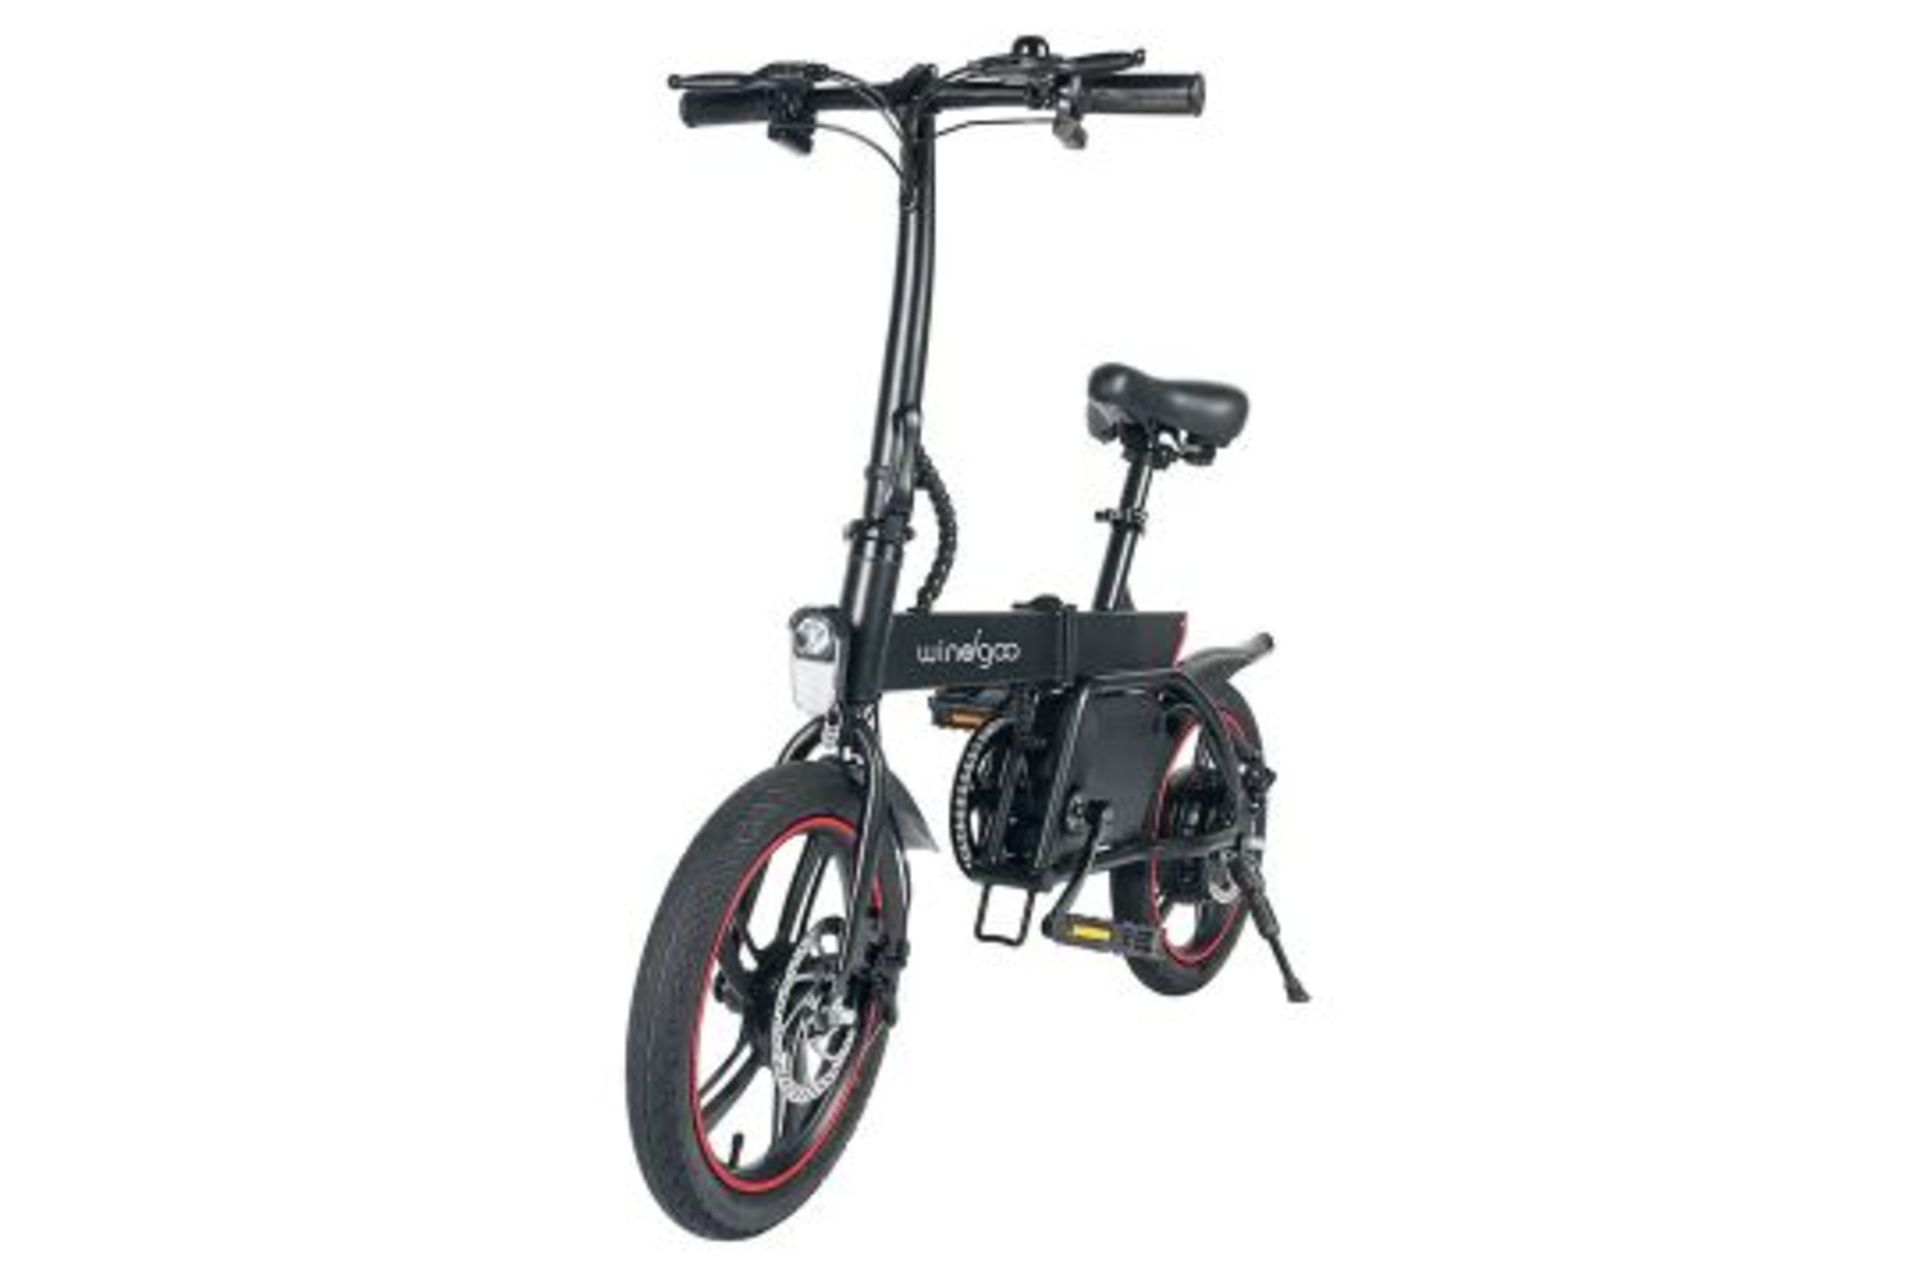 BRAND NEW Windgoo B20 Pro Electric Bike. RRP £1,100.99. With 16-inch-wide tires and a frame of - Bild 3 aus 3